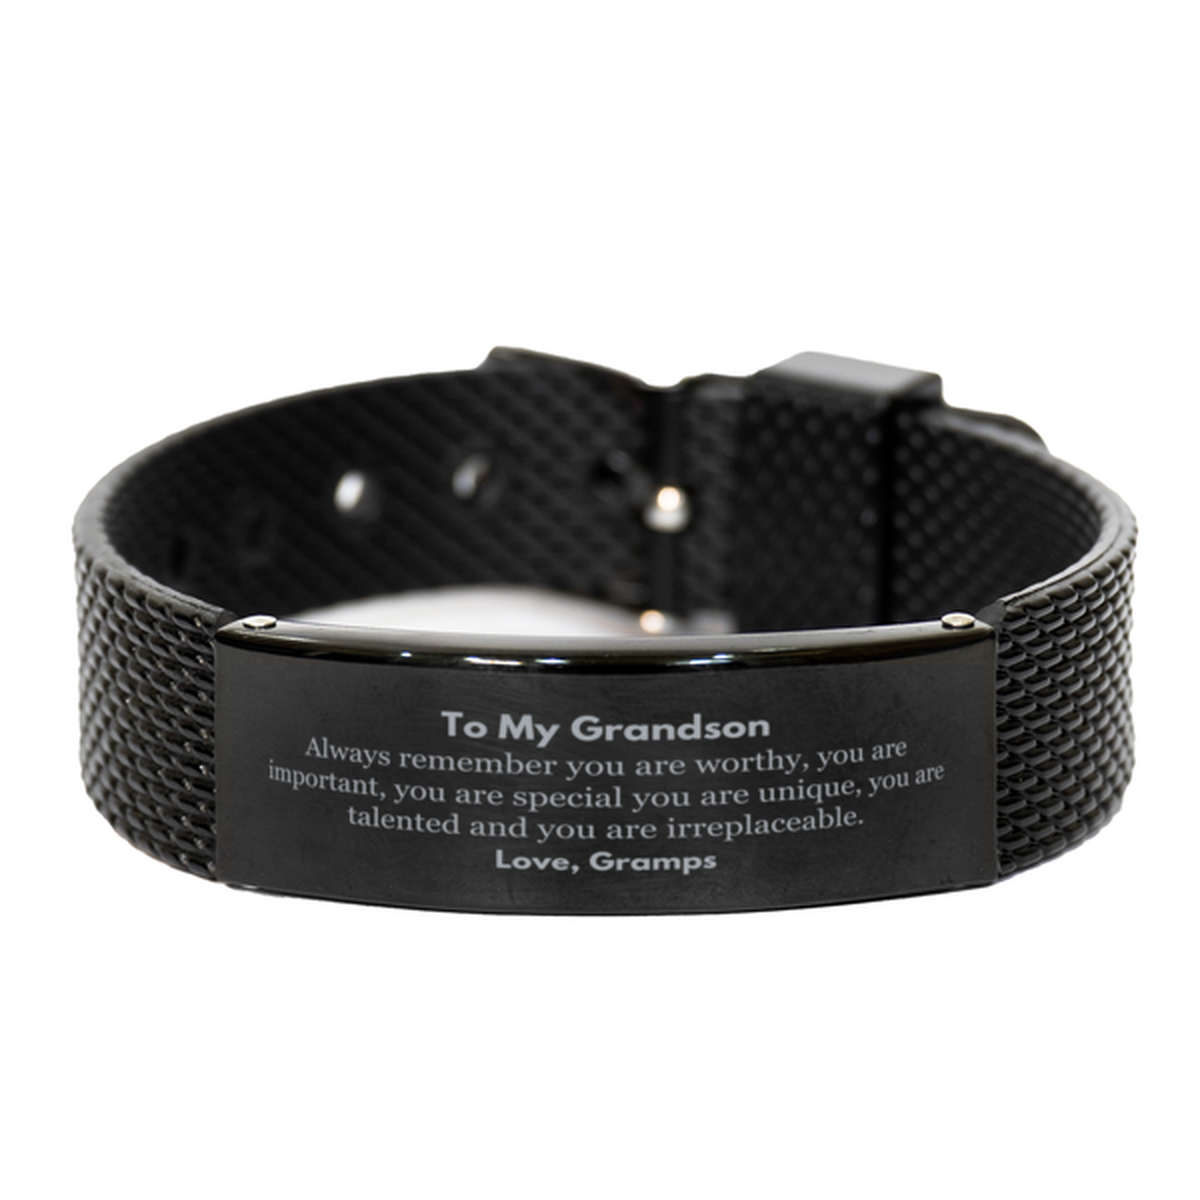 Grandson Birthday Gifts from Gramps, Inspirational Black Shark Mesh Bracelet for Grandson Christmas Graduation Gifts for Grandson Always remember you are worthy, you are important. Love, Gramps